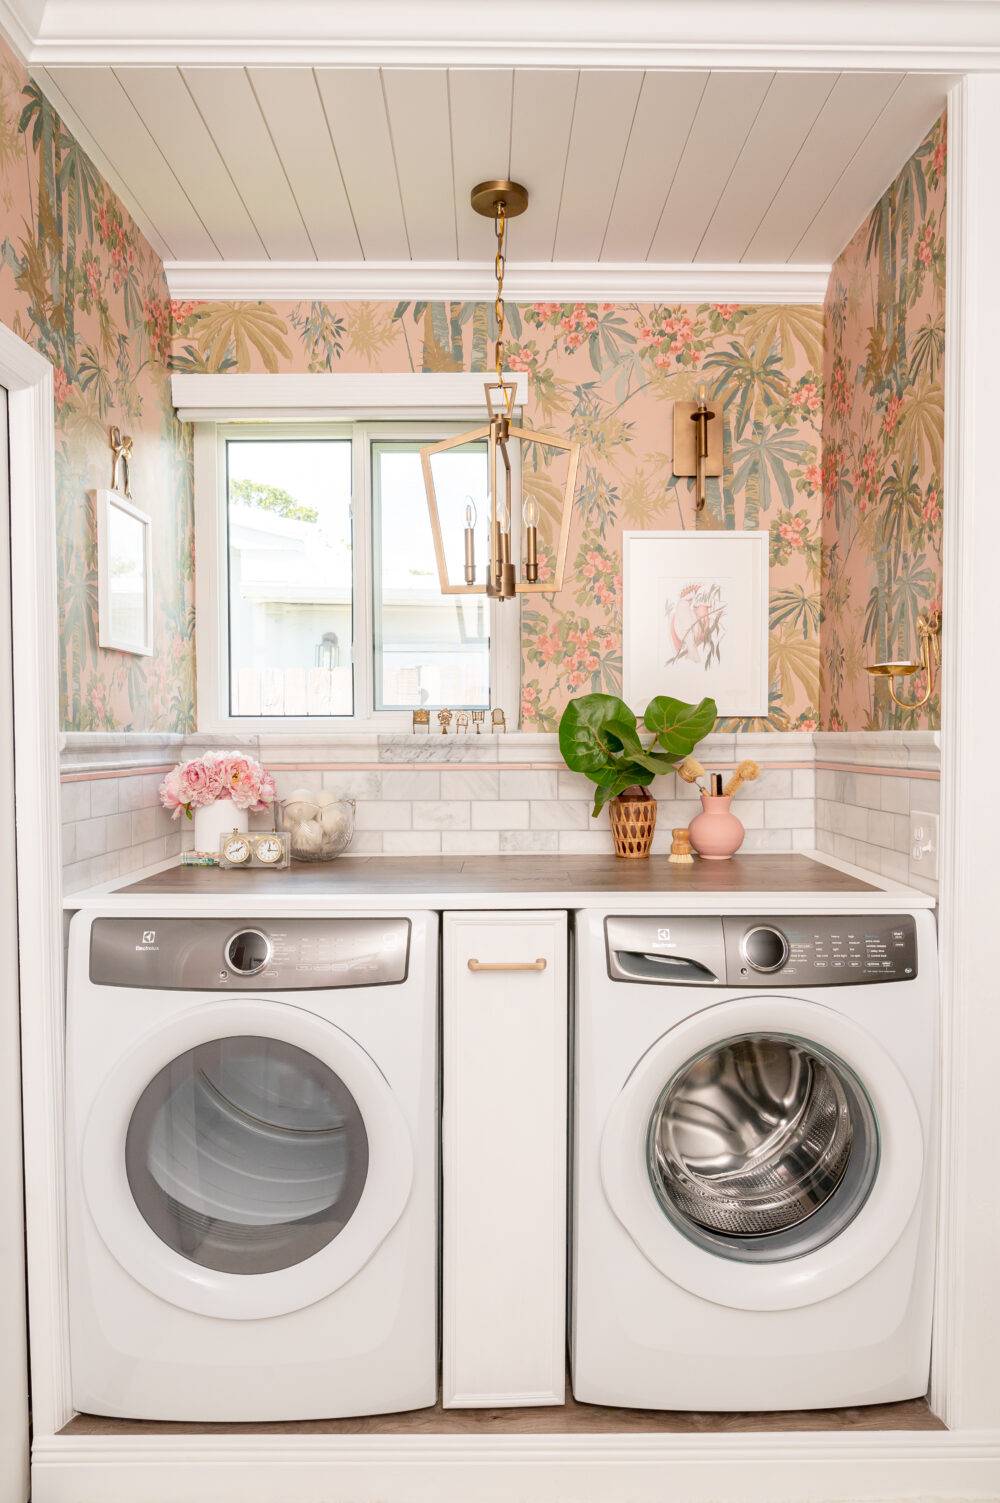 Washer and dryer with small plants and nicknacks. Bright pink floral wallpaper and marble tile.
